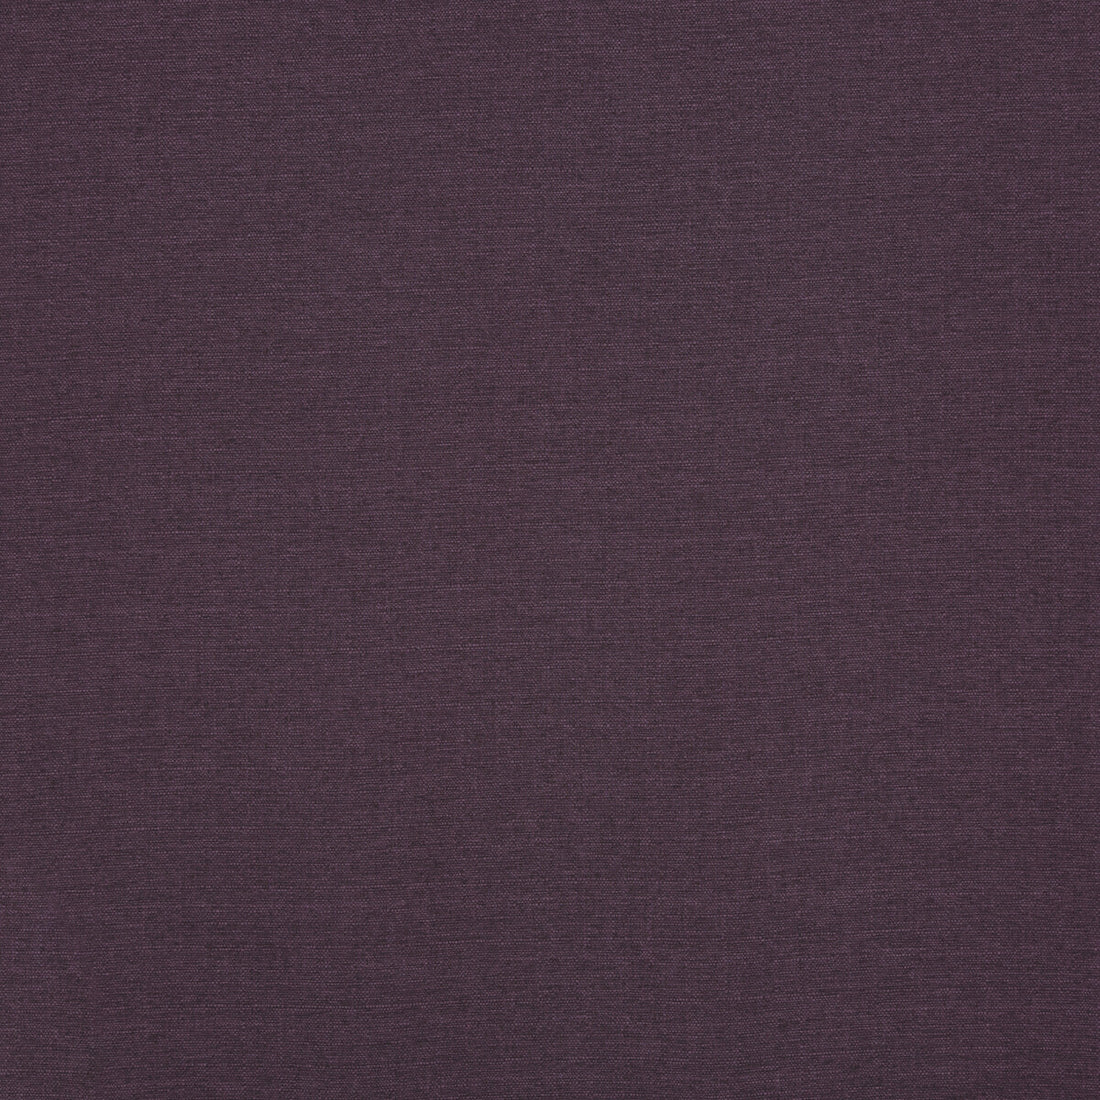 Lansdowne fabric in plum color - pattern PF50413.588.0 - by Baker Lifestyle in the Notebooks collection